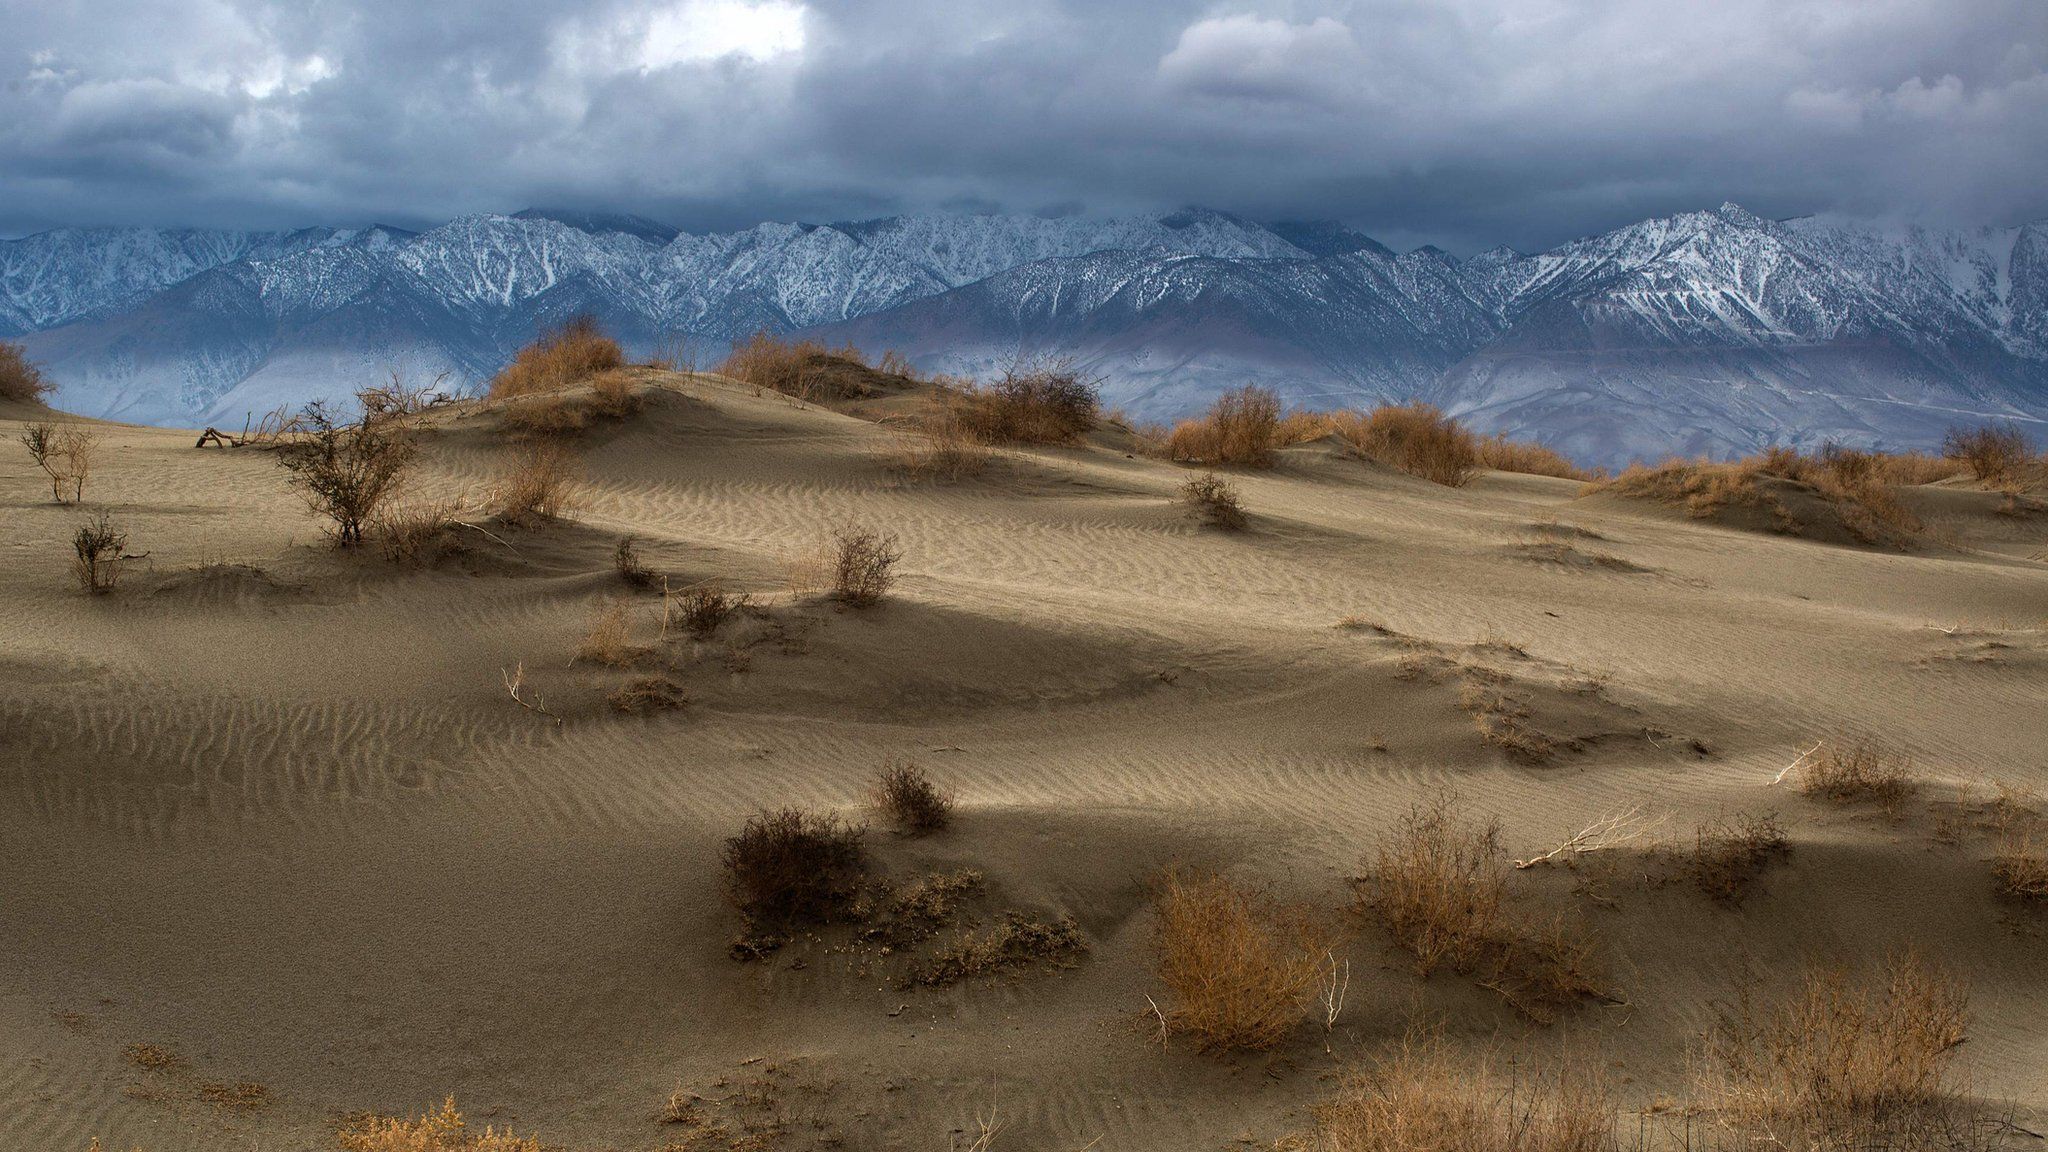 Desert sand dunes are seen with snowy Eastern Sierra Nevada Mountains in the distance near Lone Pine, California